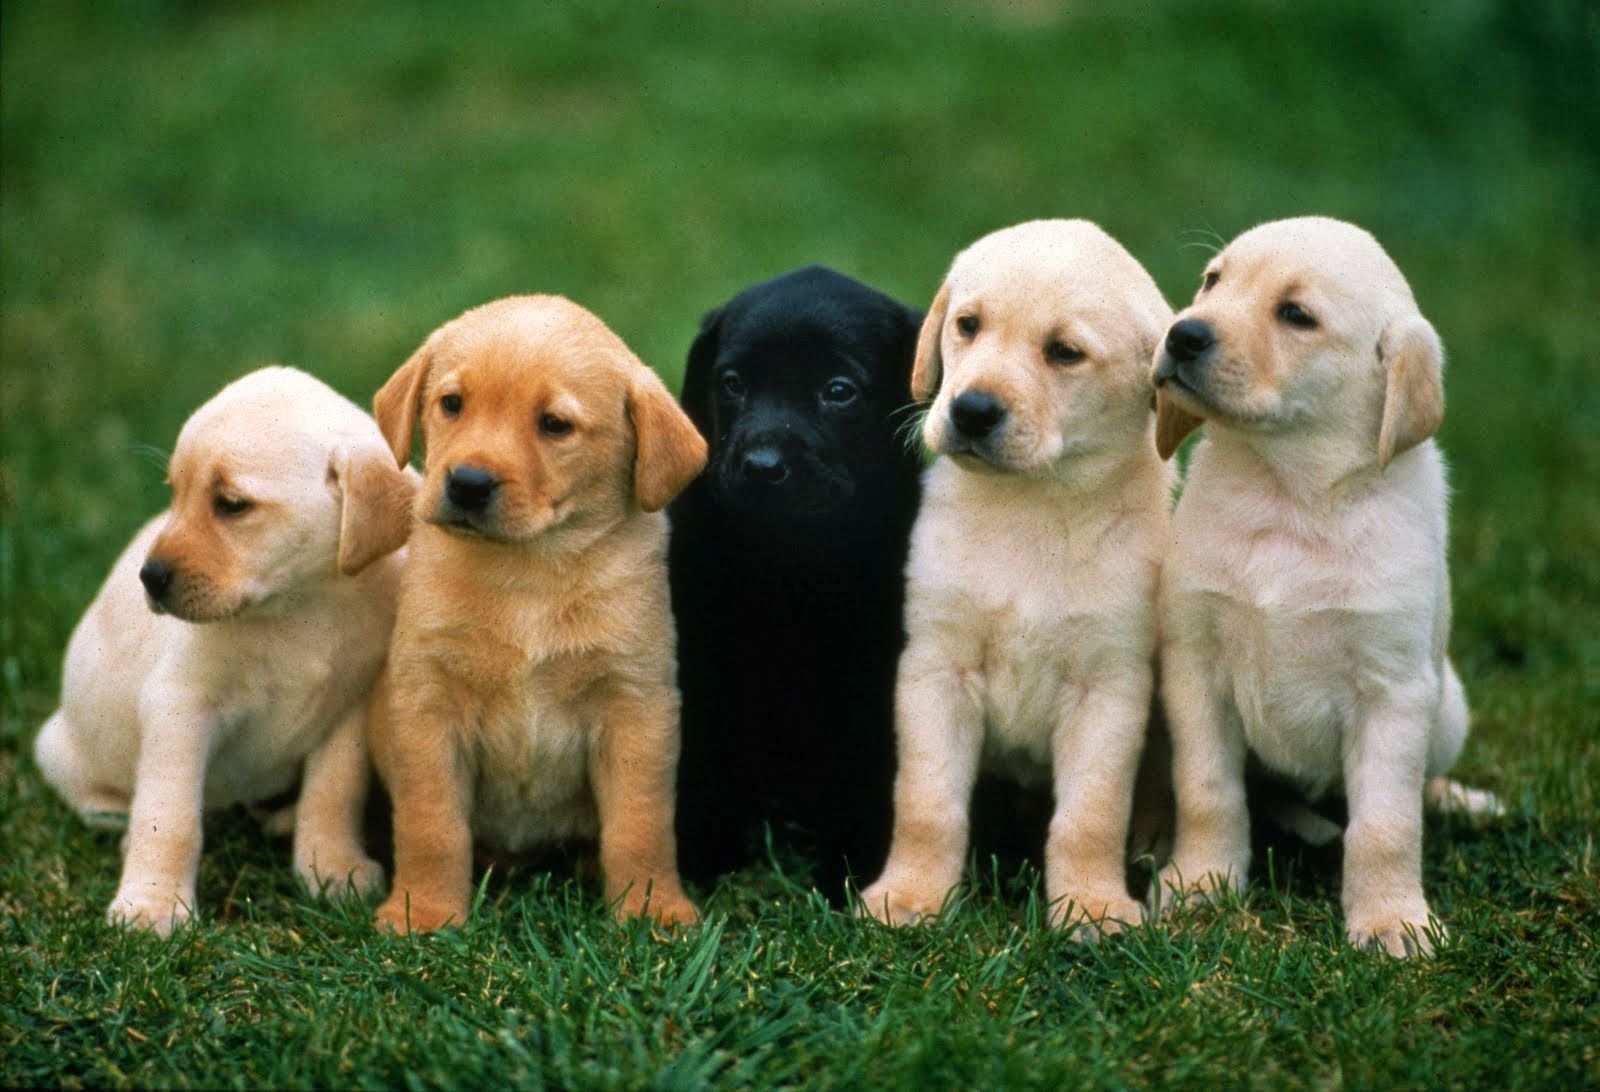 Cute All Puppies Wallpaper Picture #1441 Wallpaper | High ...